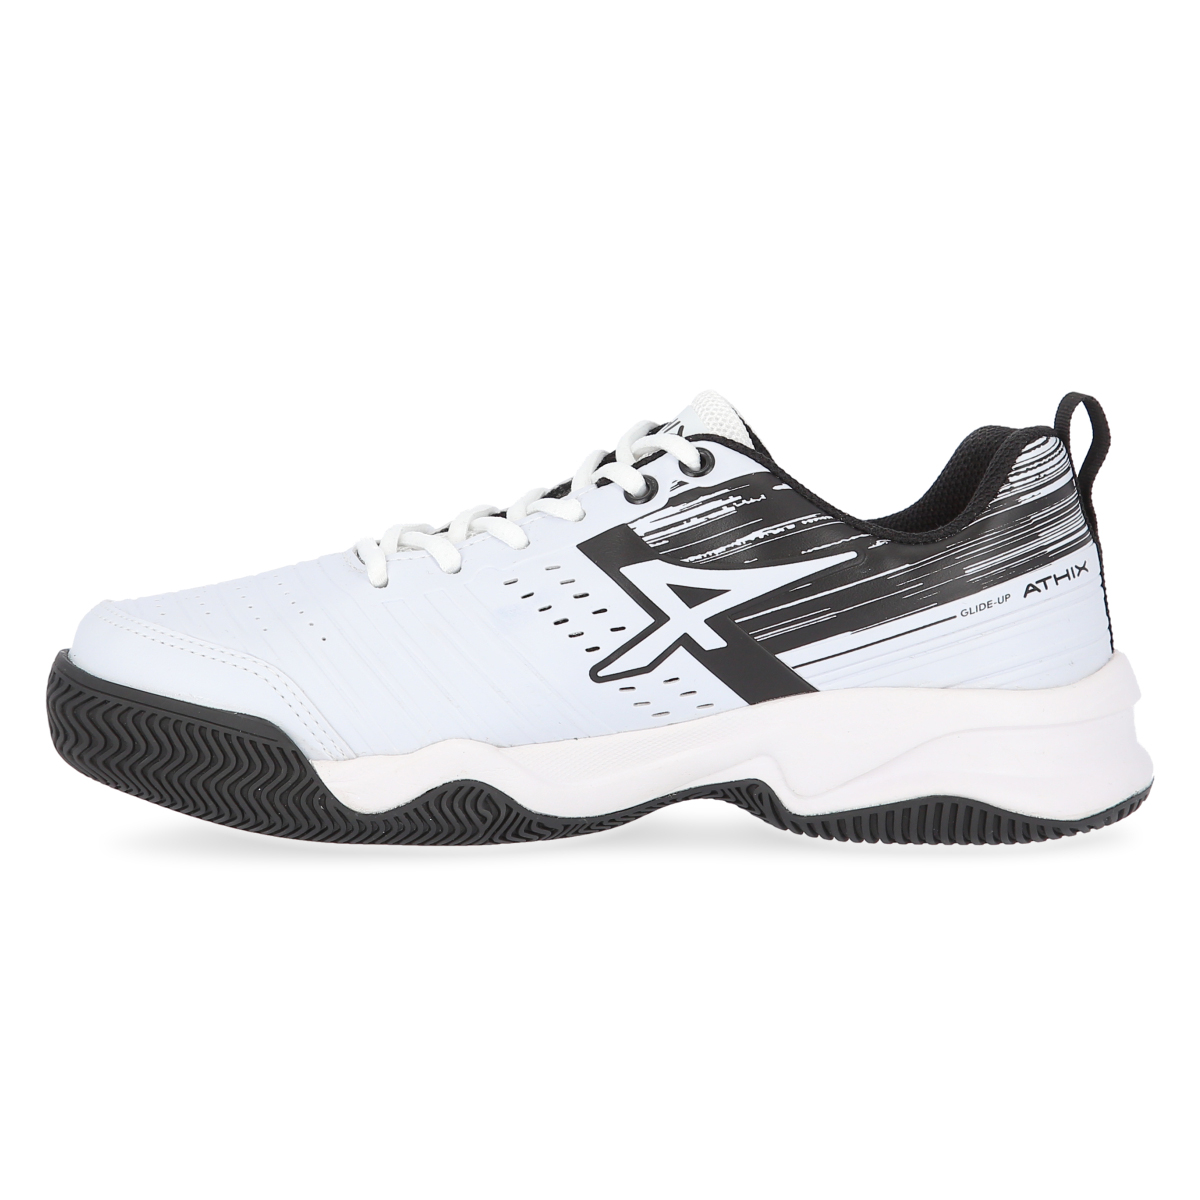 Zapatillas Athix Glide Up,  image number null